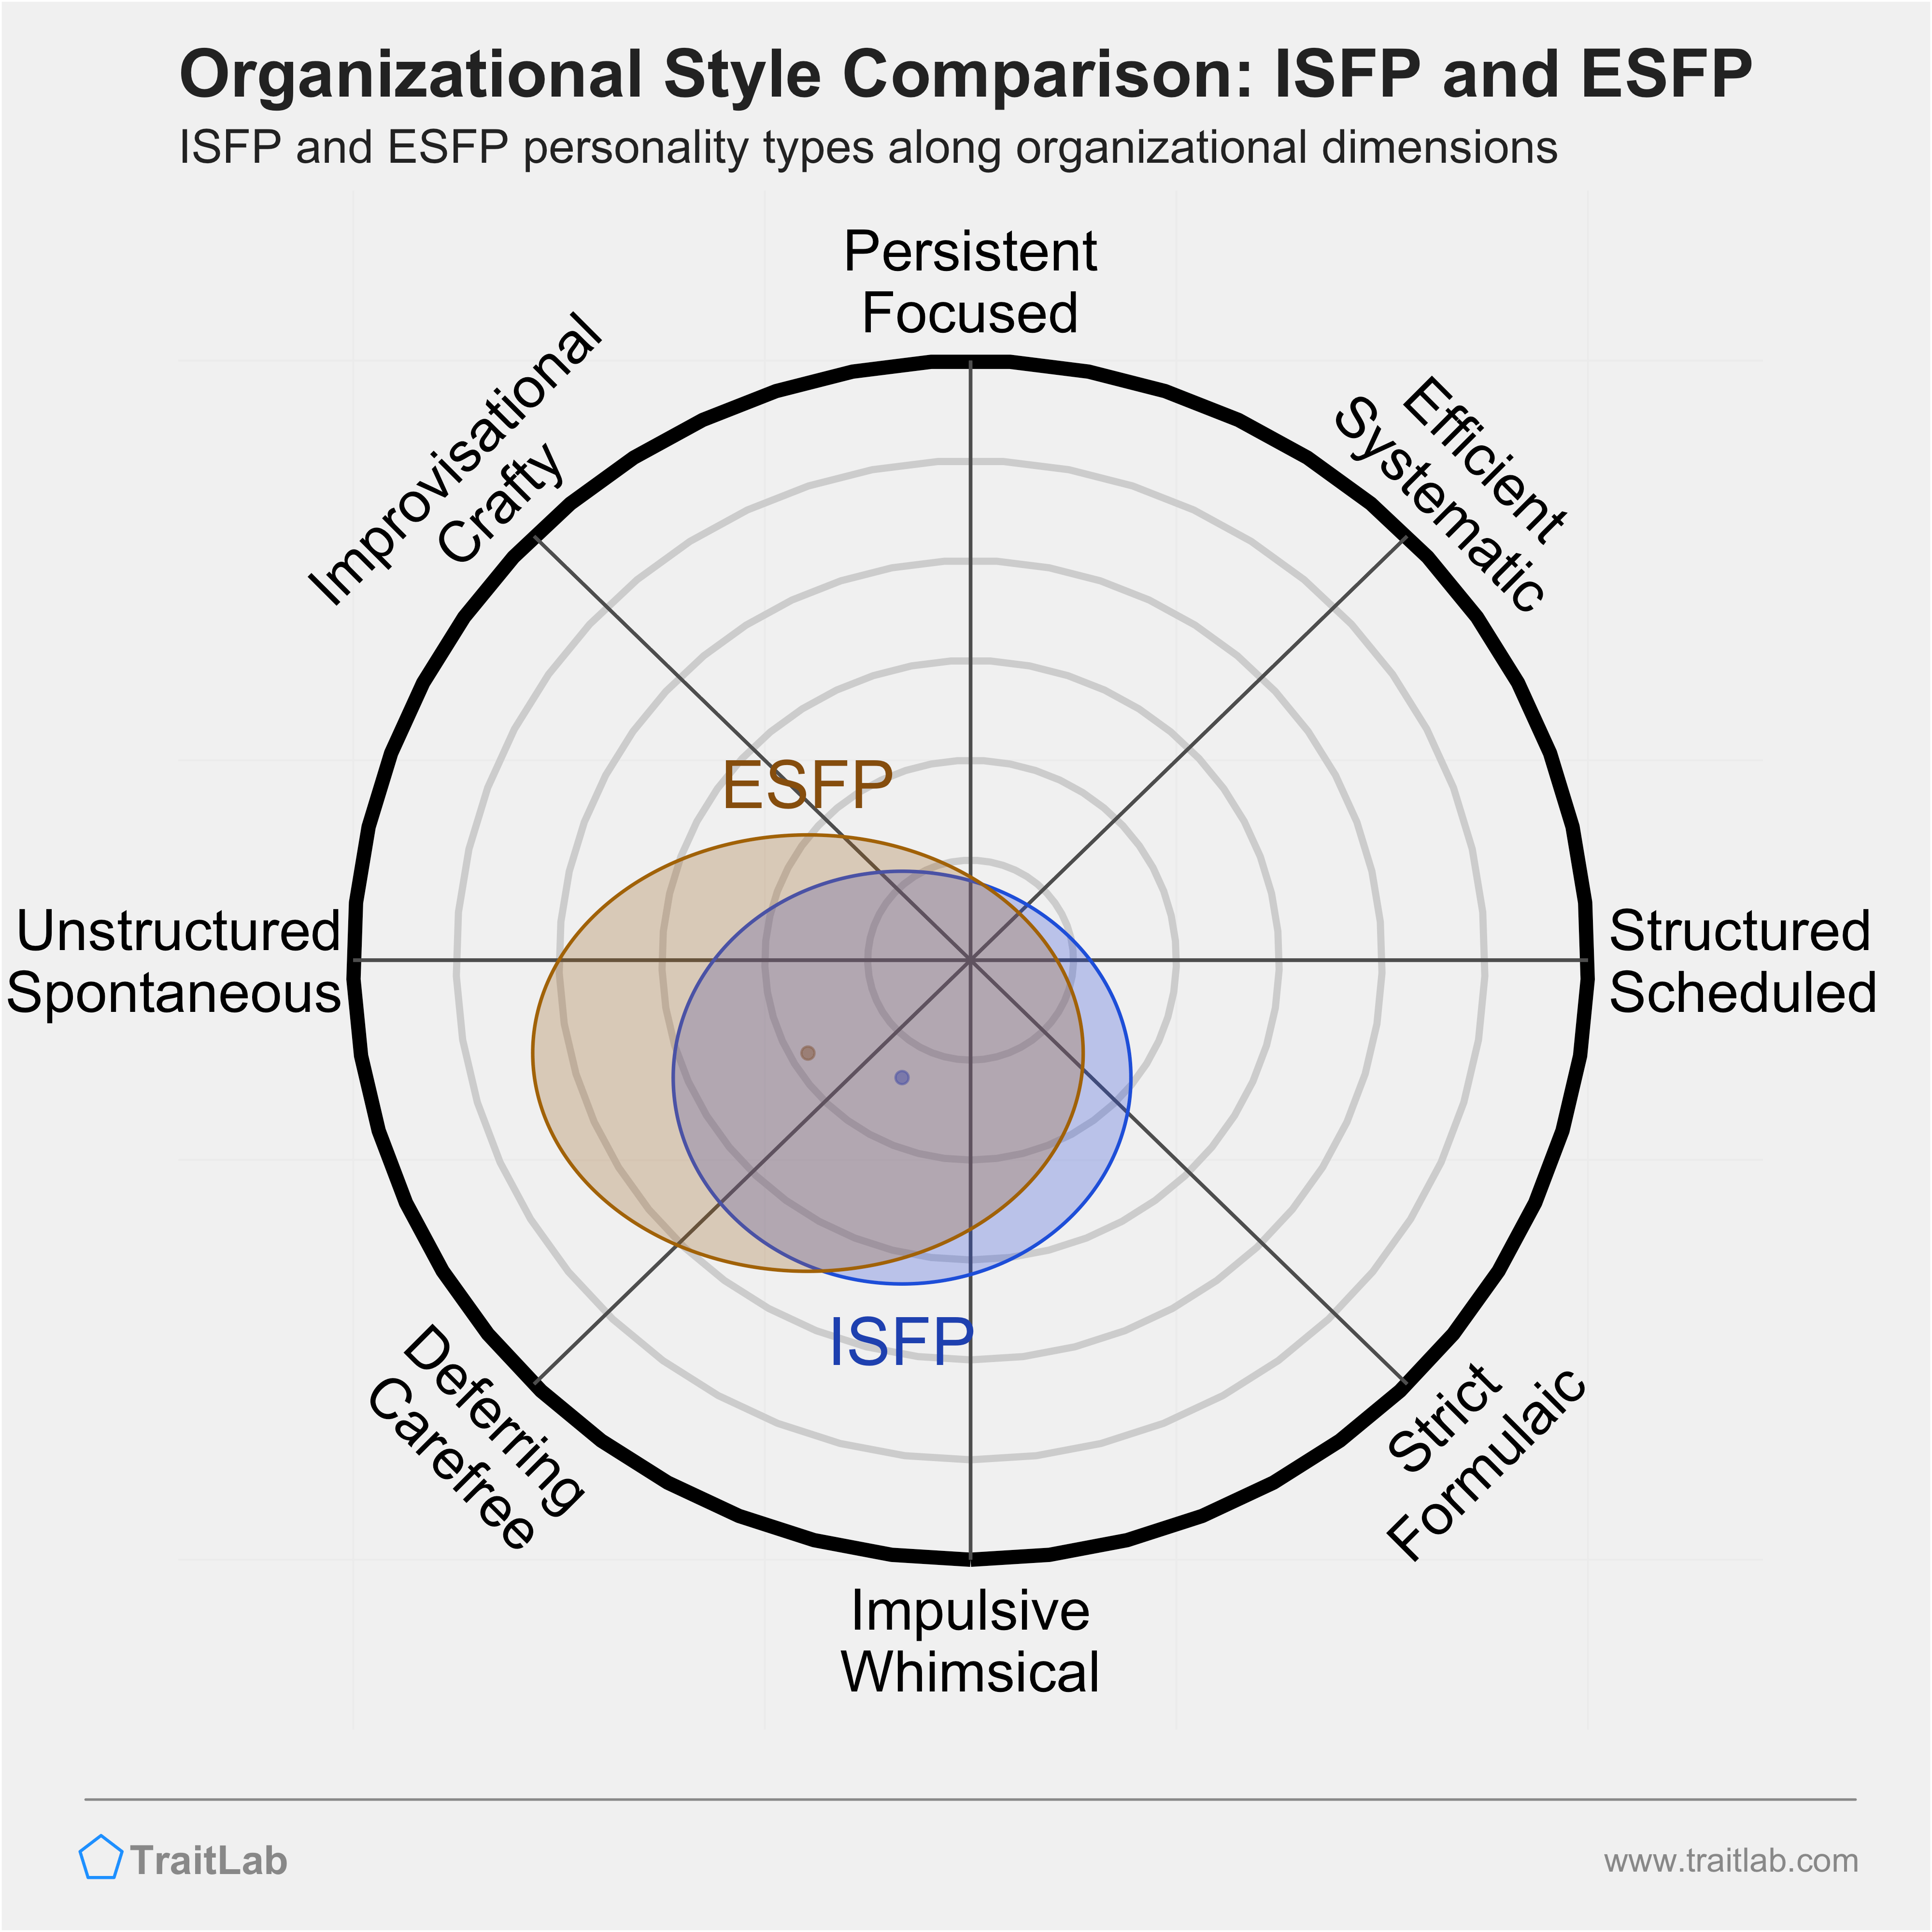 ISFP and ESFP comparison across organizational dimensions